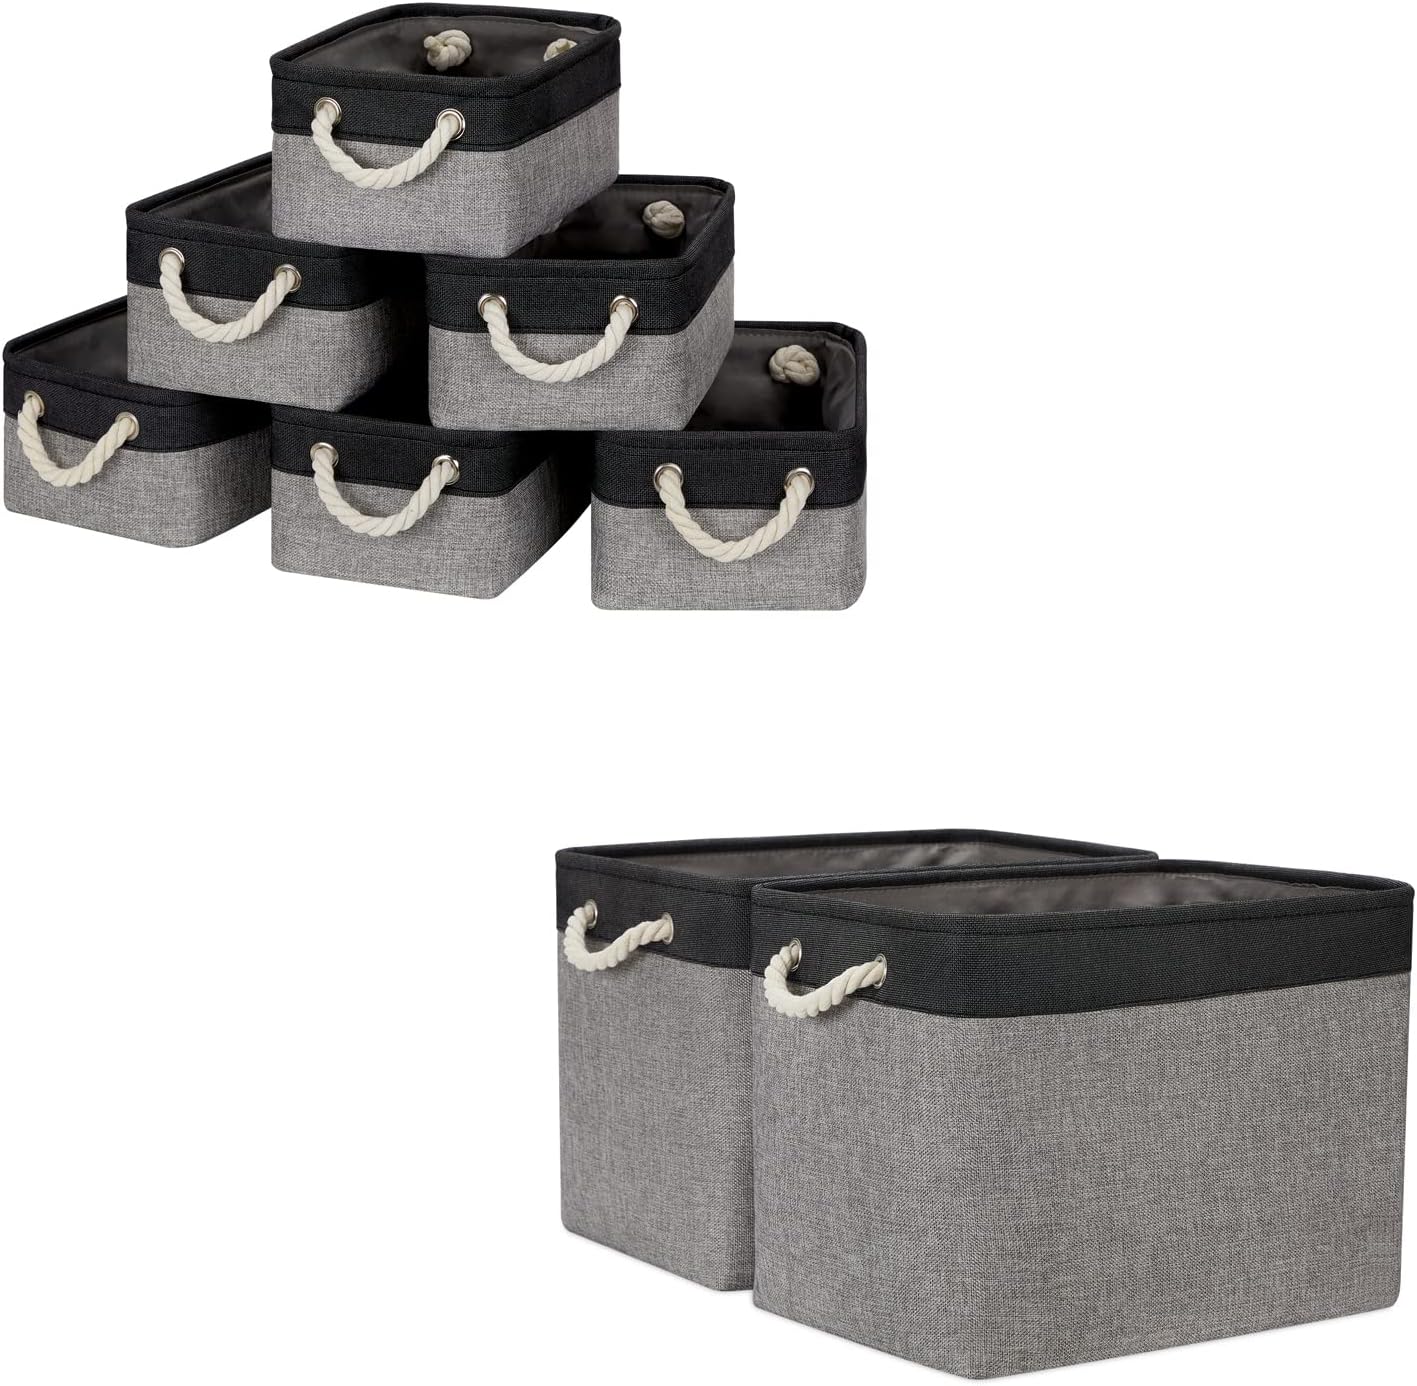 Temary Storage Baskets 6 Pack Small Fabric Storage Bins with 2 Pcs Large Baskets for Organizing Towels, Blankets (Black&Gray, 11.8Lx7.9Wx5.3H Inches, 16Lx12Wx12H Inches)